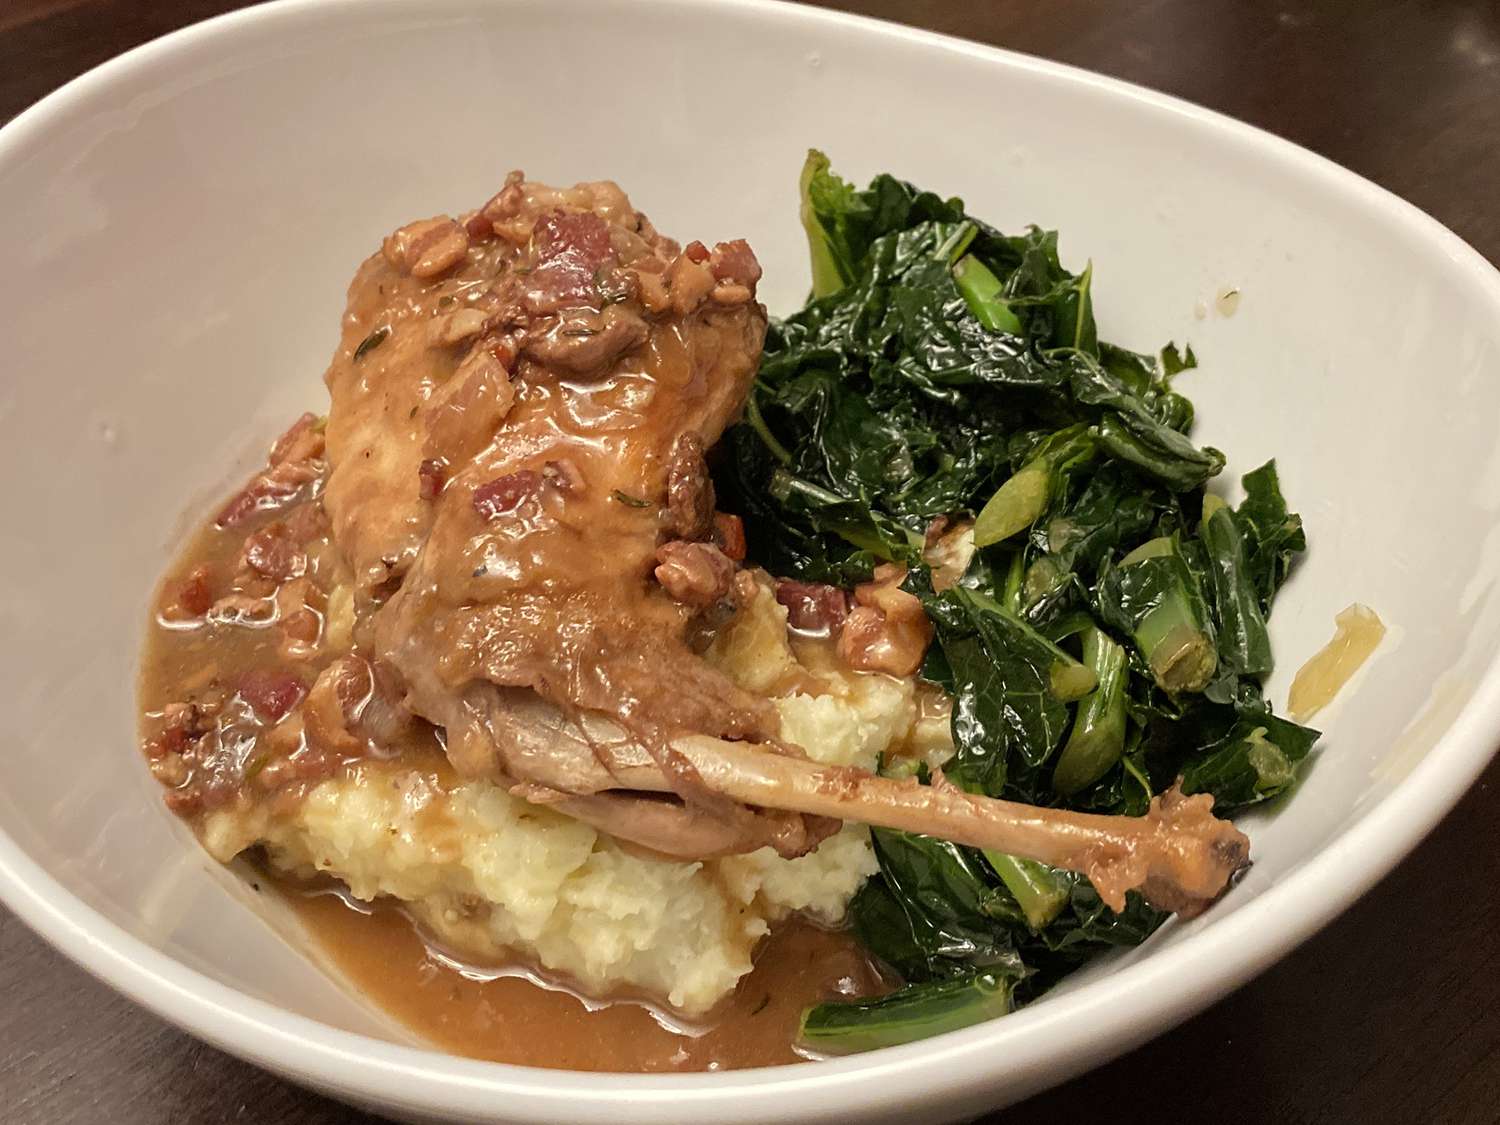 close up view of Hasenpfeffer (Rabbit Stew) served with mashed potatoes and greens in a bowl